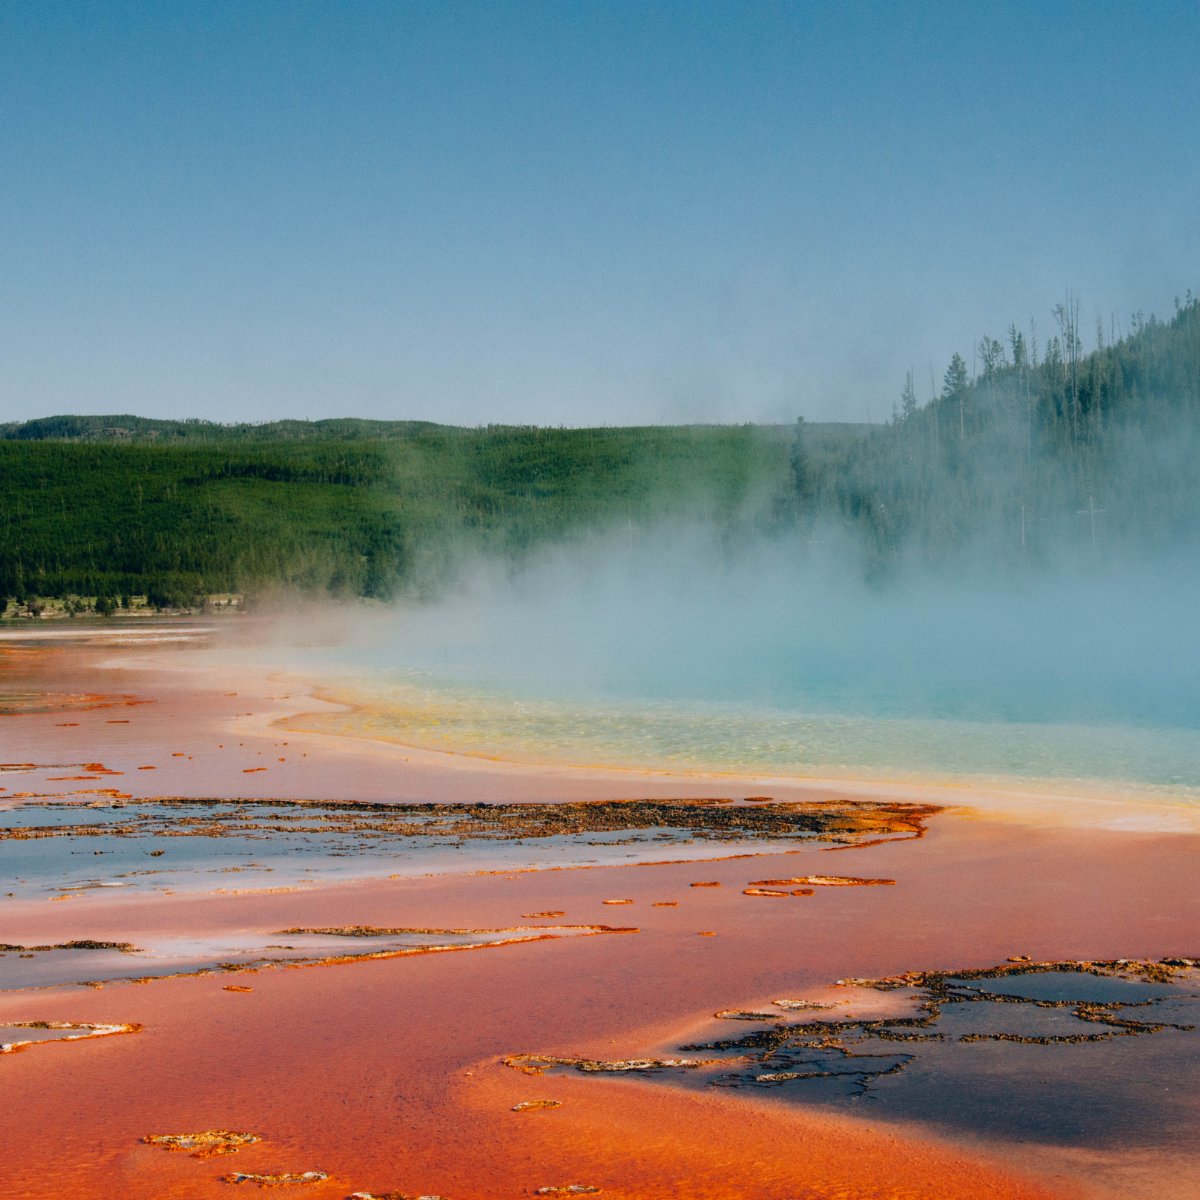 If you're still looking for a spring break destination for the family, nothing can beat the majestic atmosphere of Yellowstone National Park.   #NorthYellowstoneCabins #Yellowstone #NationalPark #Gardiner #VisitYellowstone